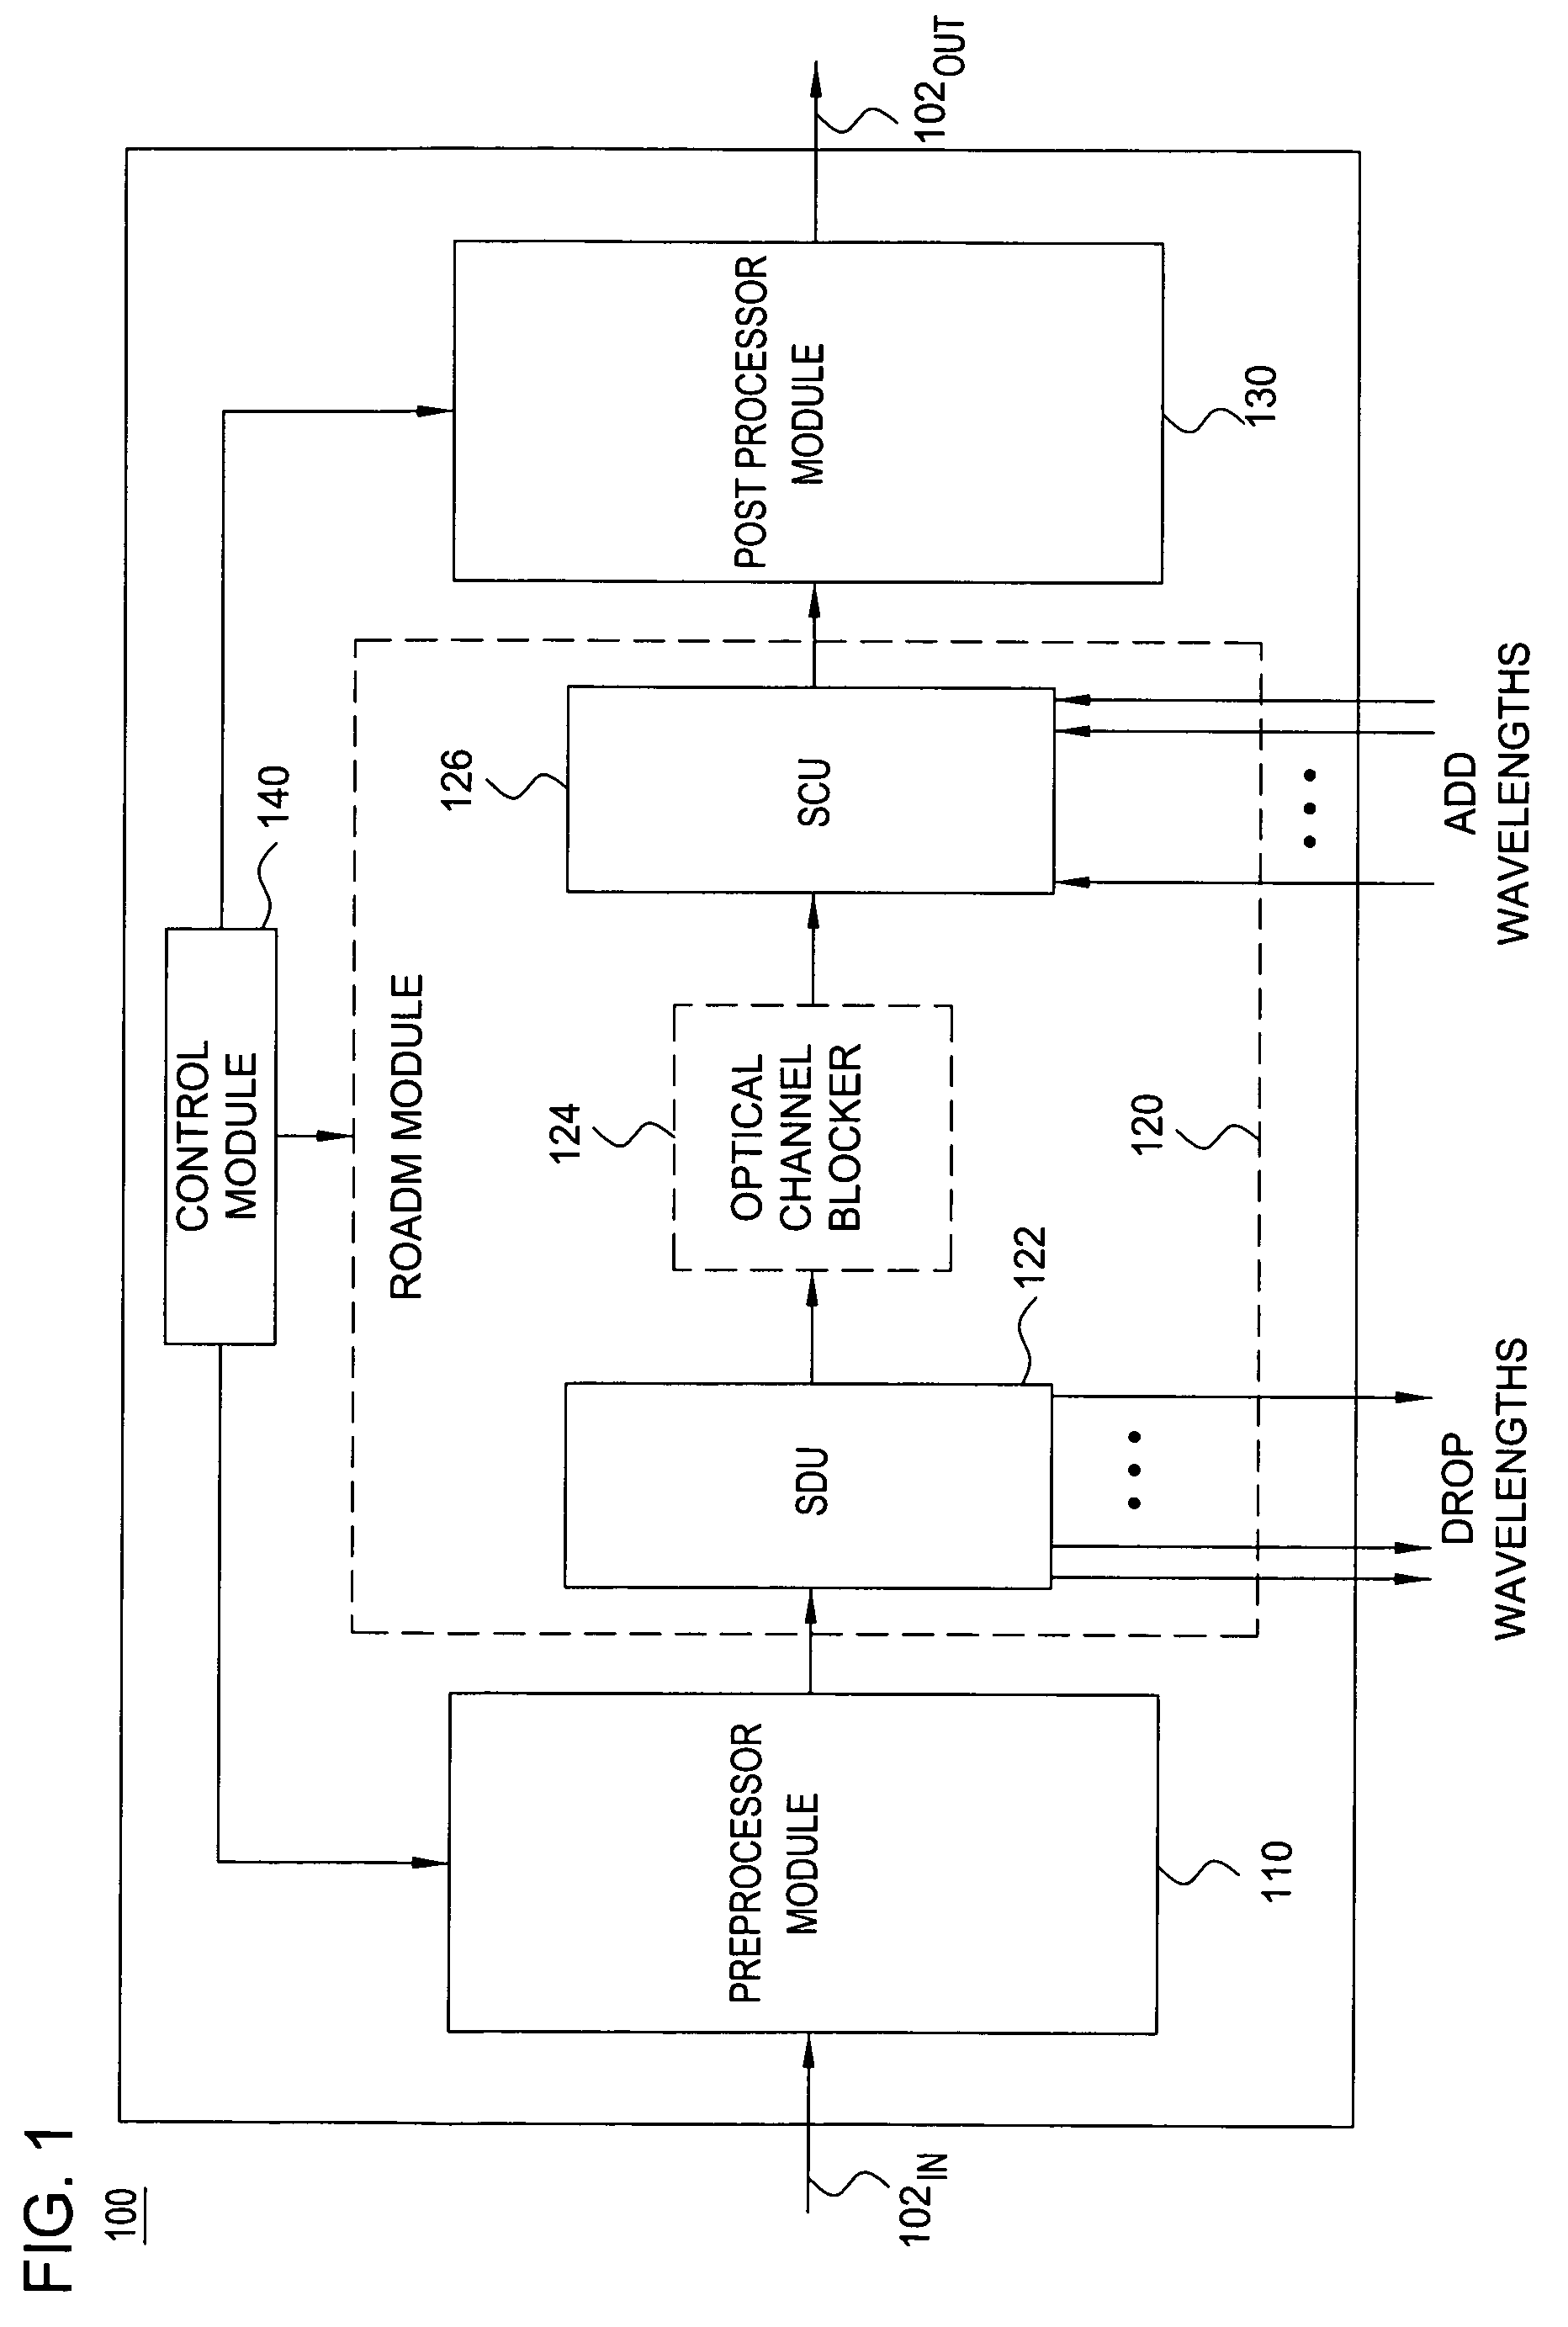 Apparatus for reducing drops in a transmission spectrum due to inter-pixel gaps